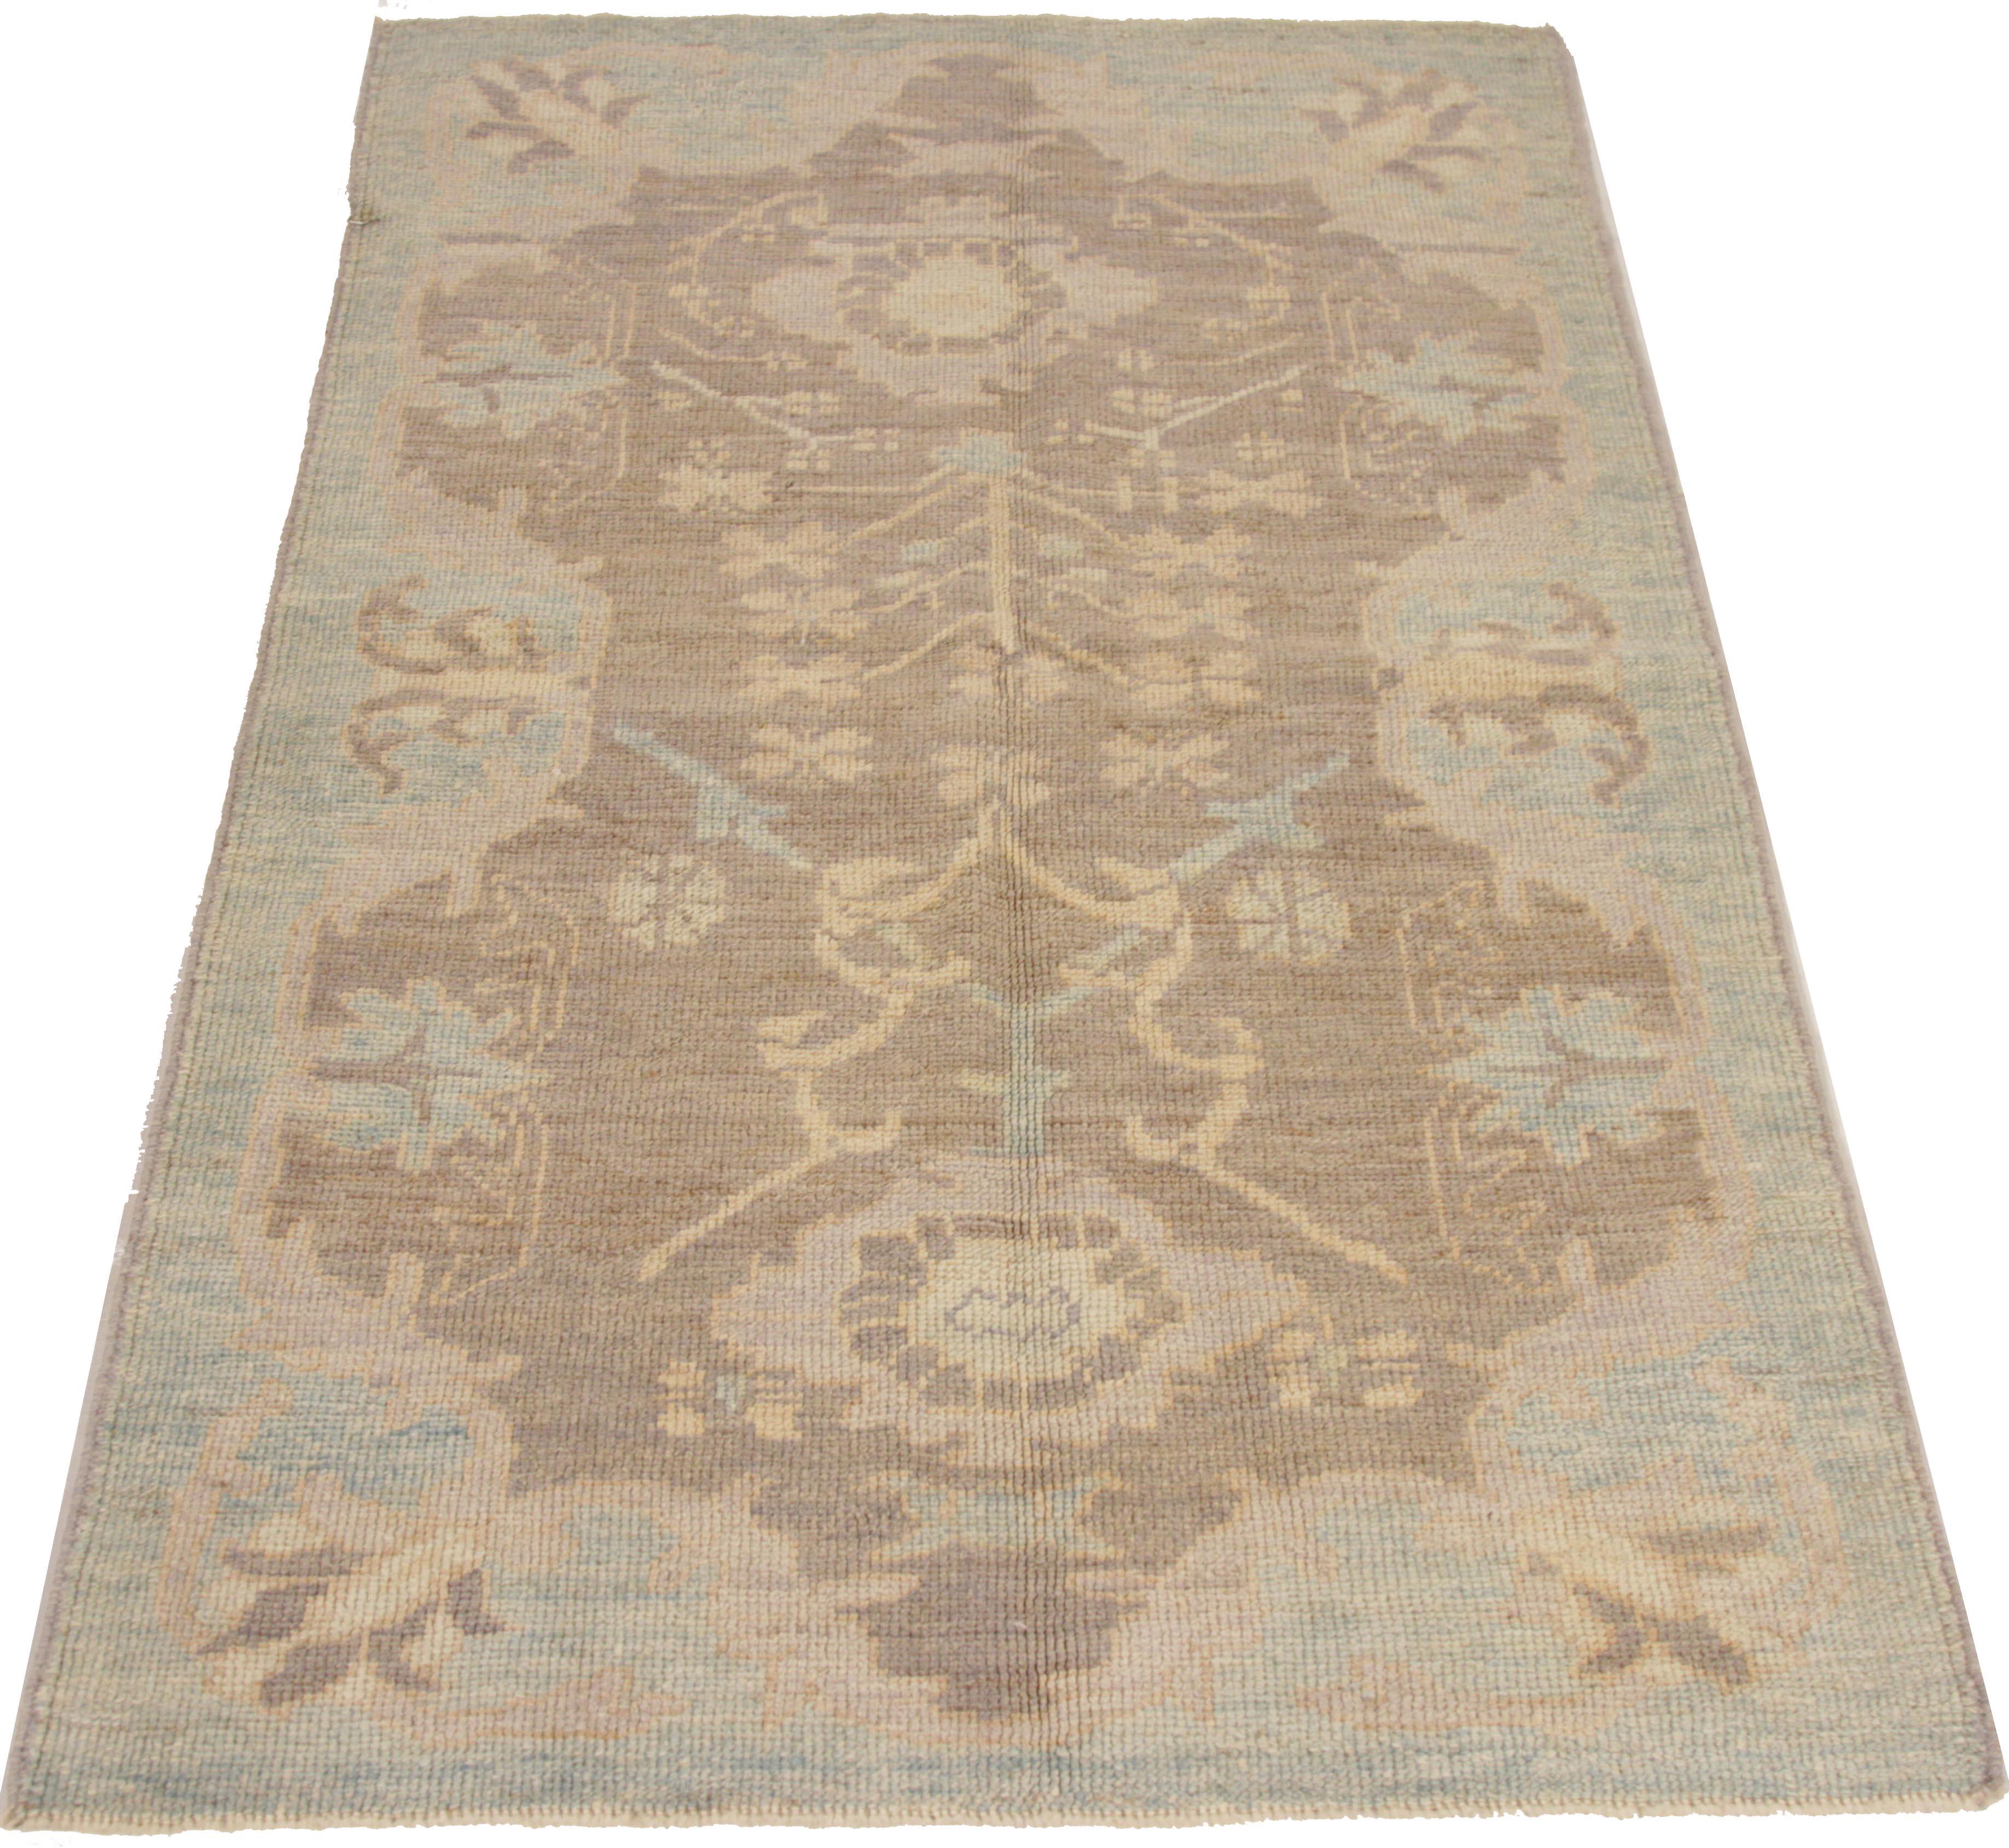 New Persian Oushak Rug with Brown and Blue Floral Design Patterns For Sale 2